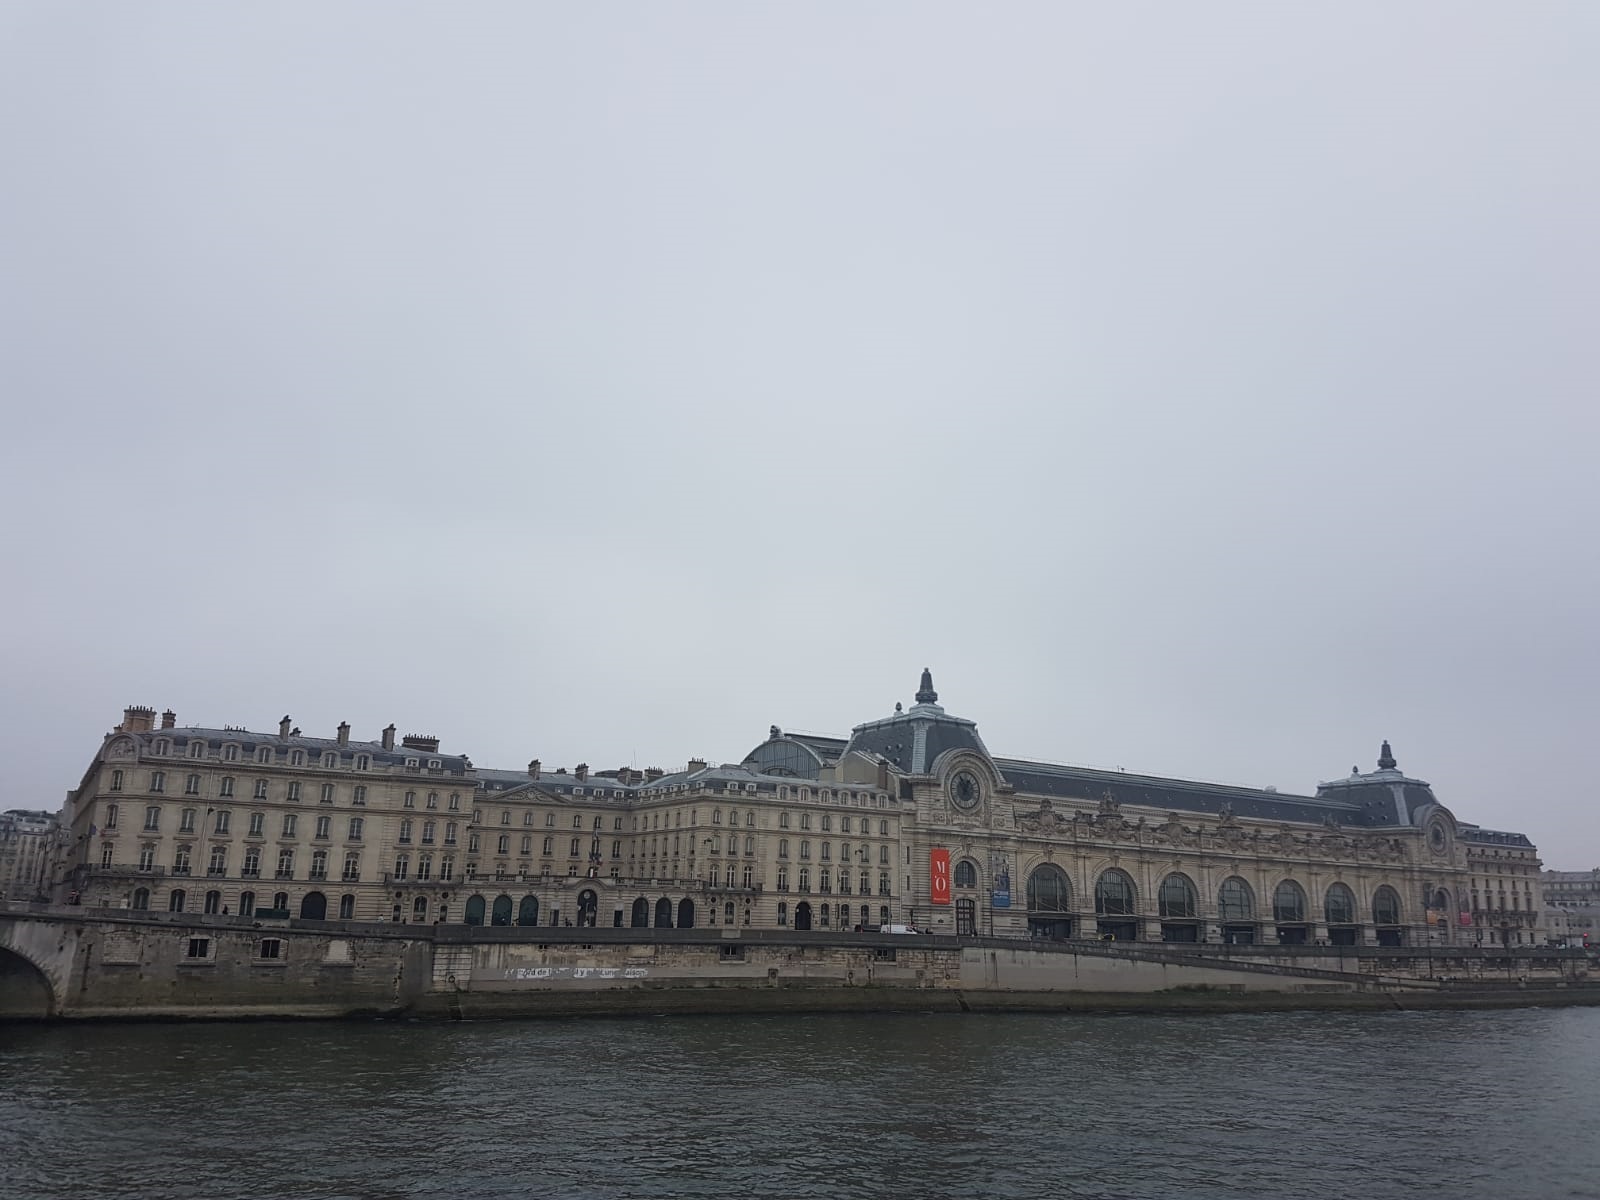 The d'Orsay Museum, laying on the Left Bank of the Seine, houses a potpourri of fine art and is a major tourist attraction.